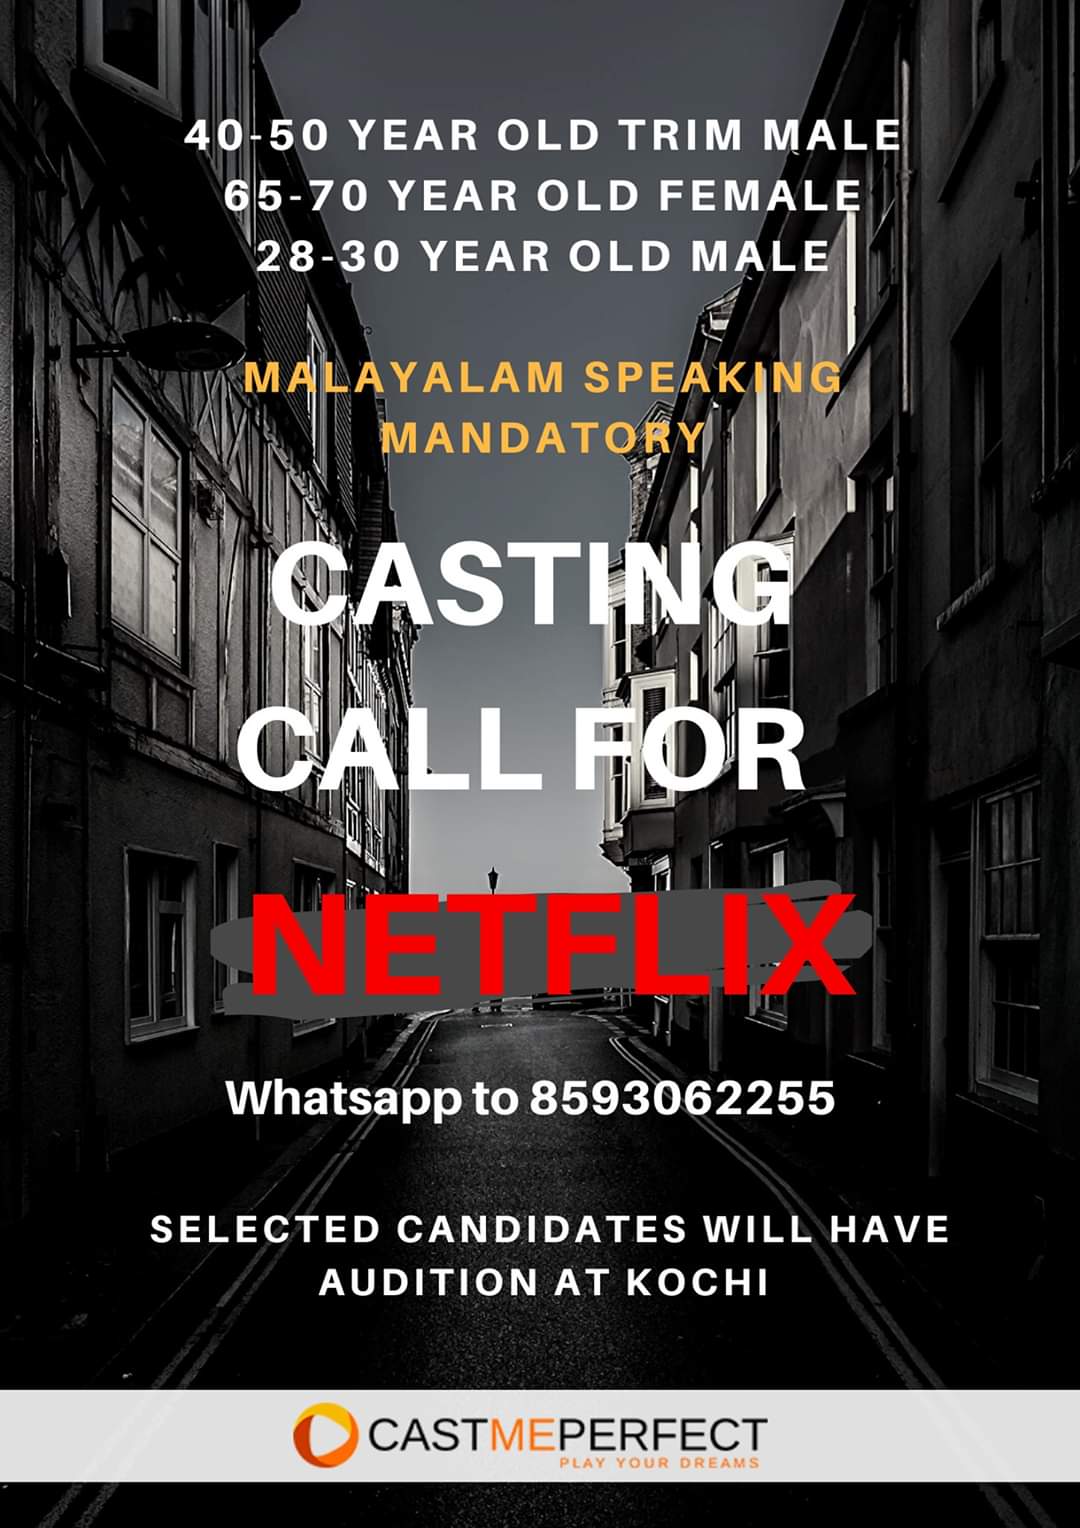 CASTING CALL FOR NETFLIX SERIES